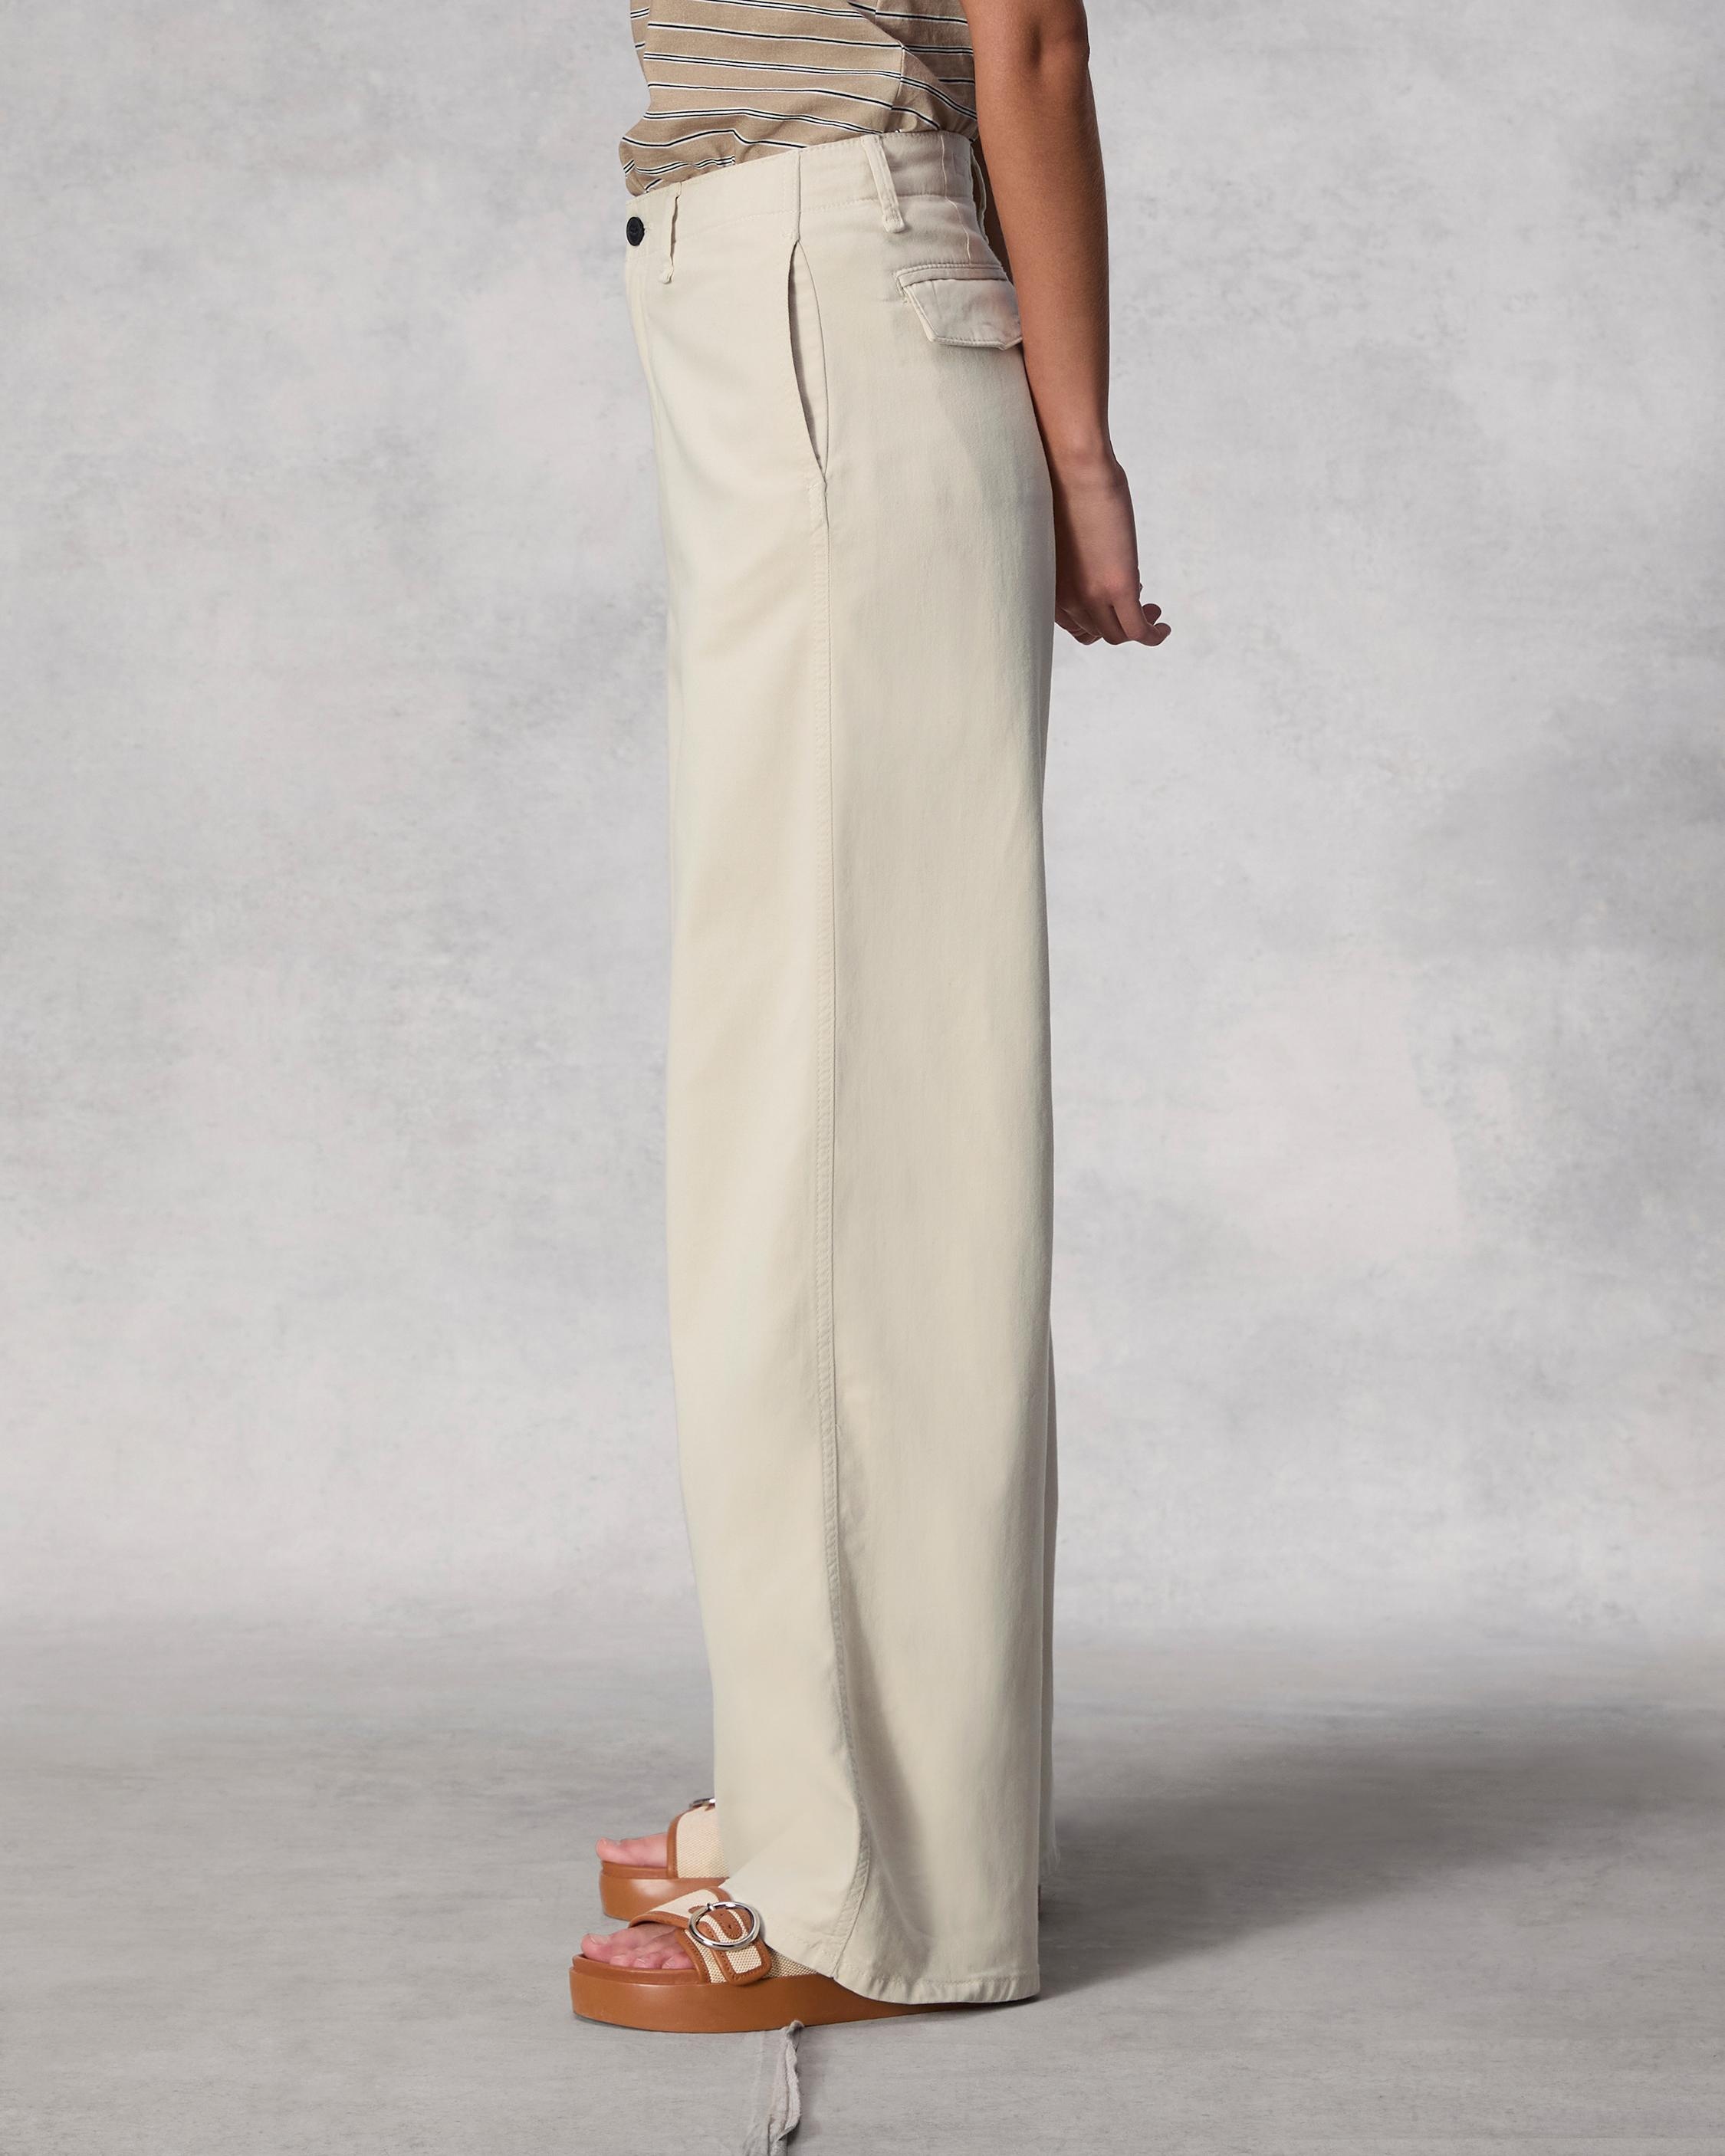 Sofie Wide-Leg Cotton Chino
Relaxed Fit - 3